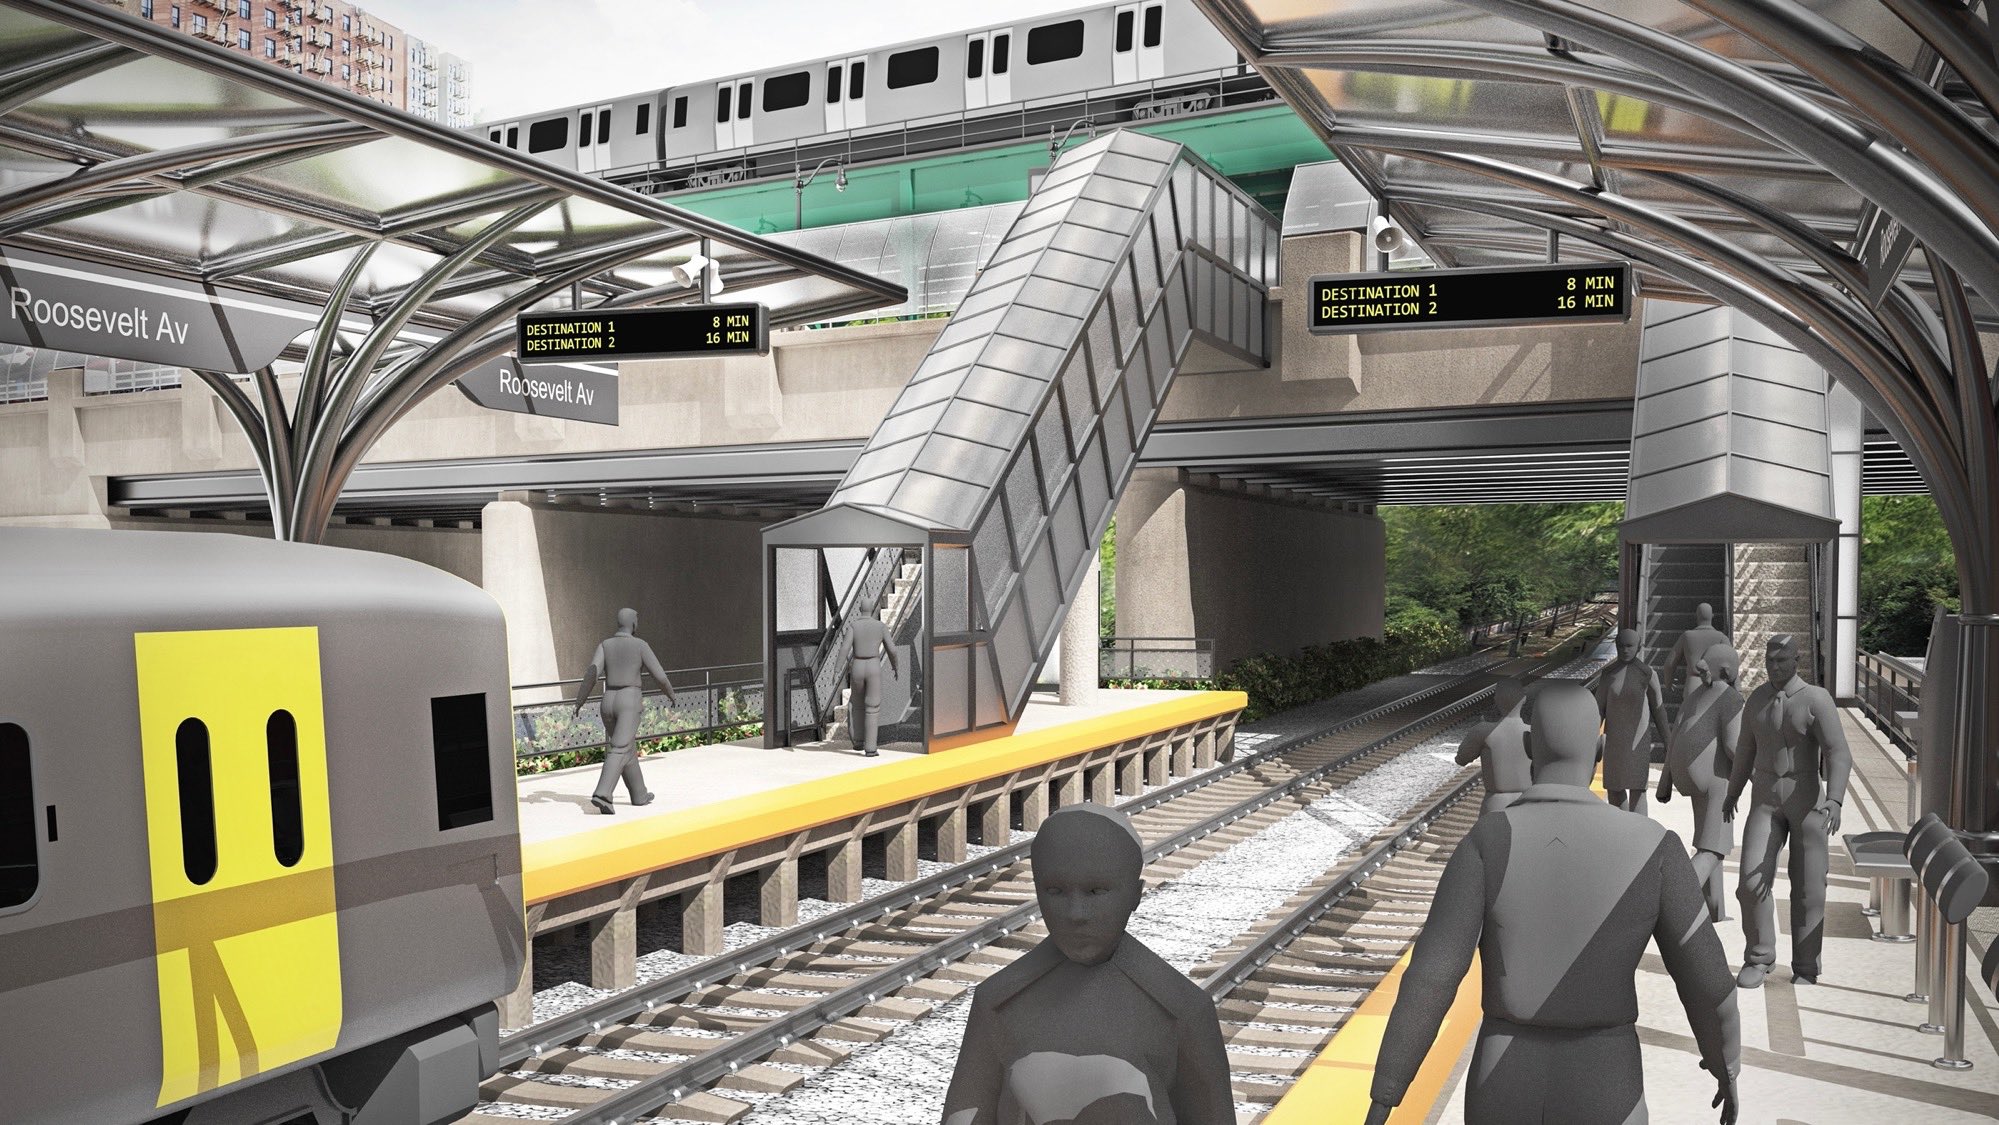 Renderings of what the Inter-borough express would look like - they should an above-ground station and train